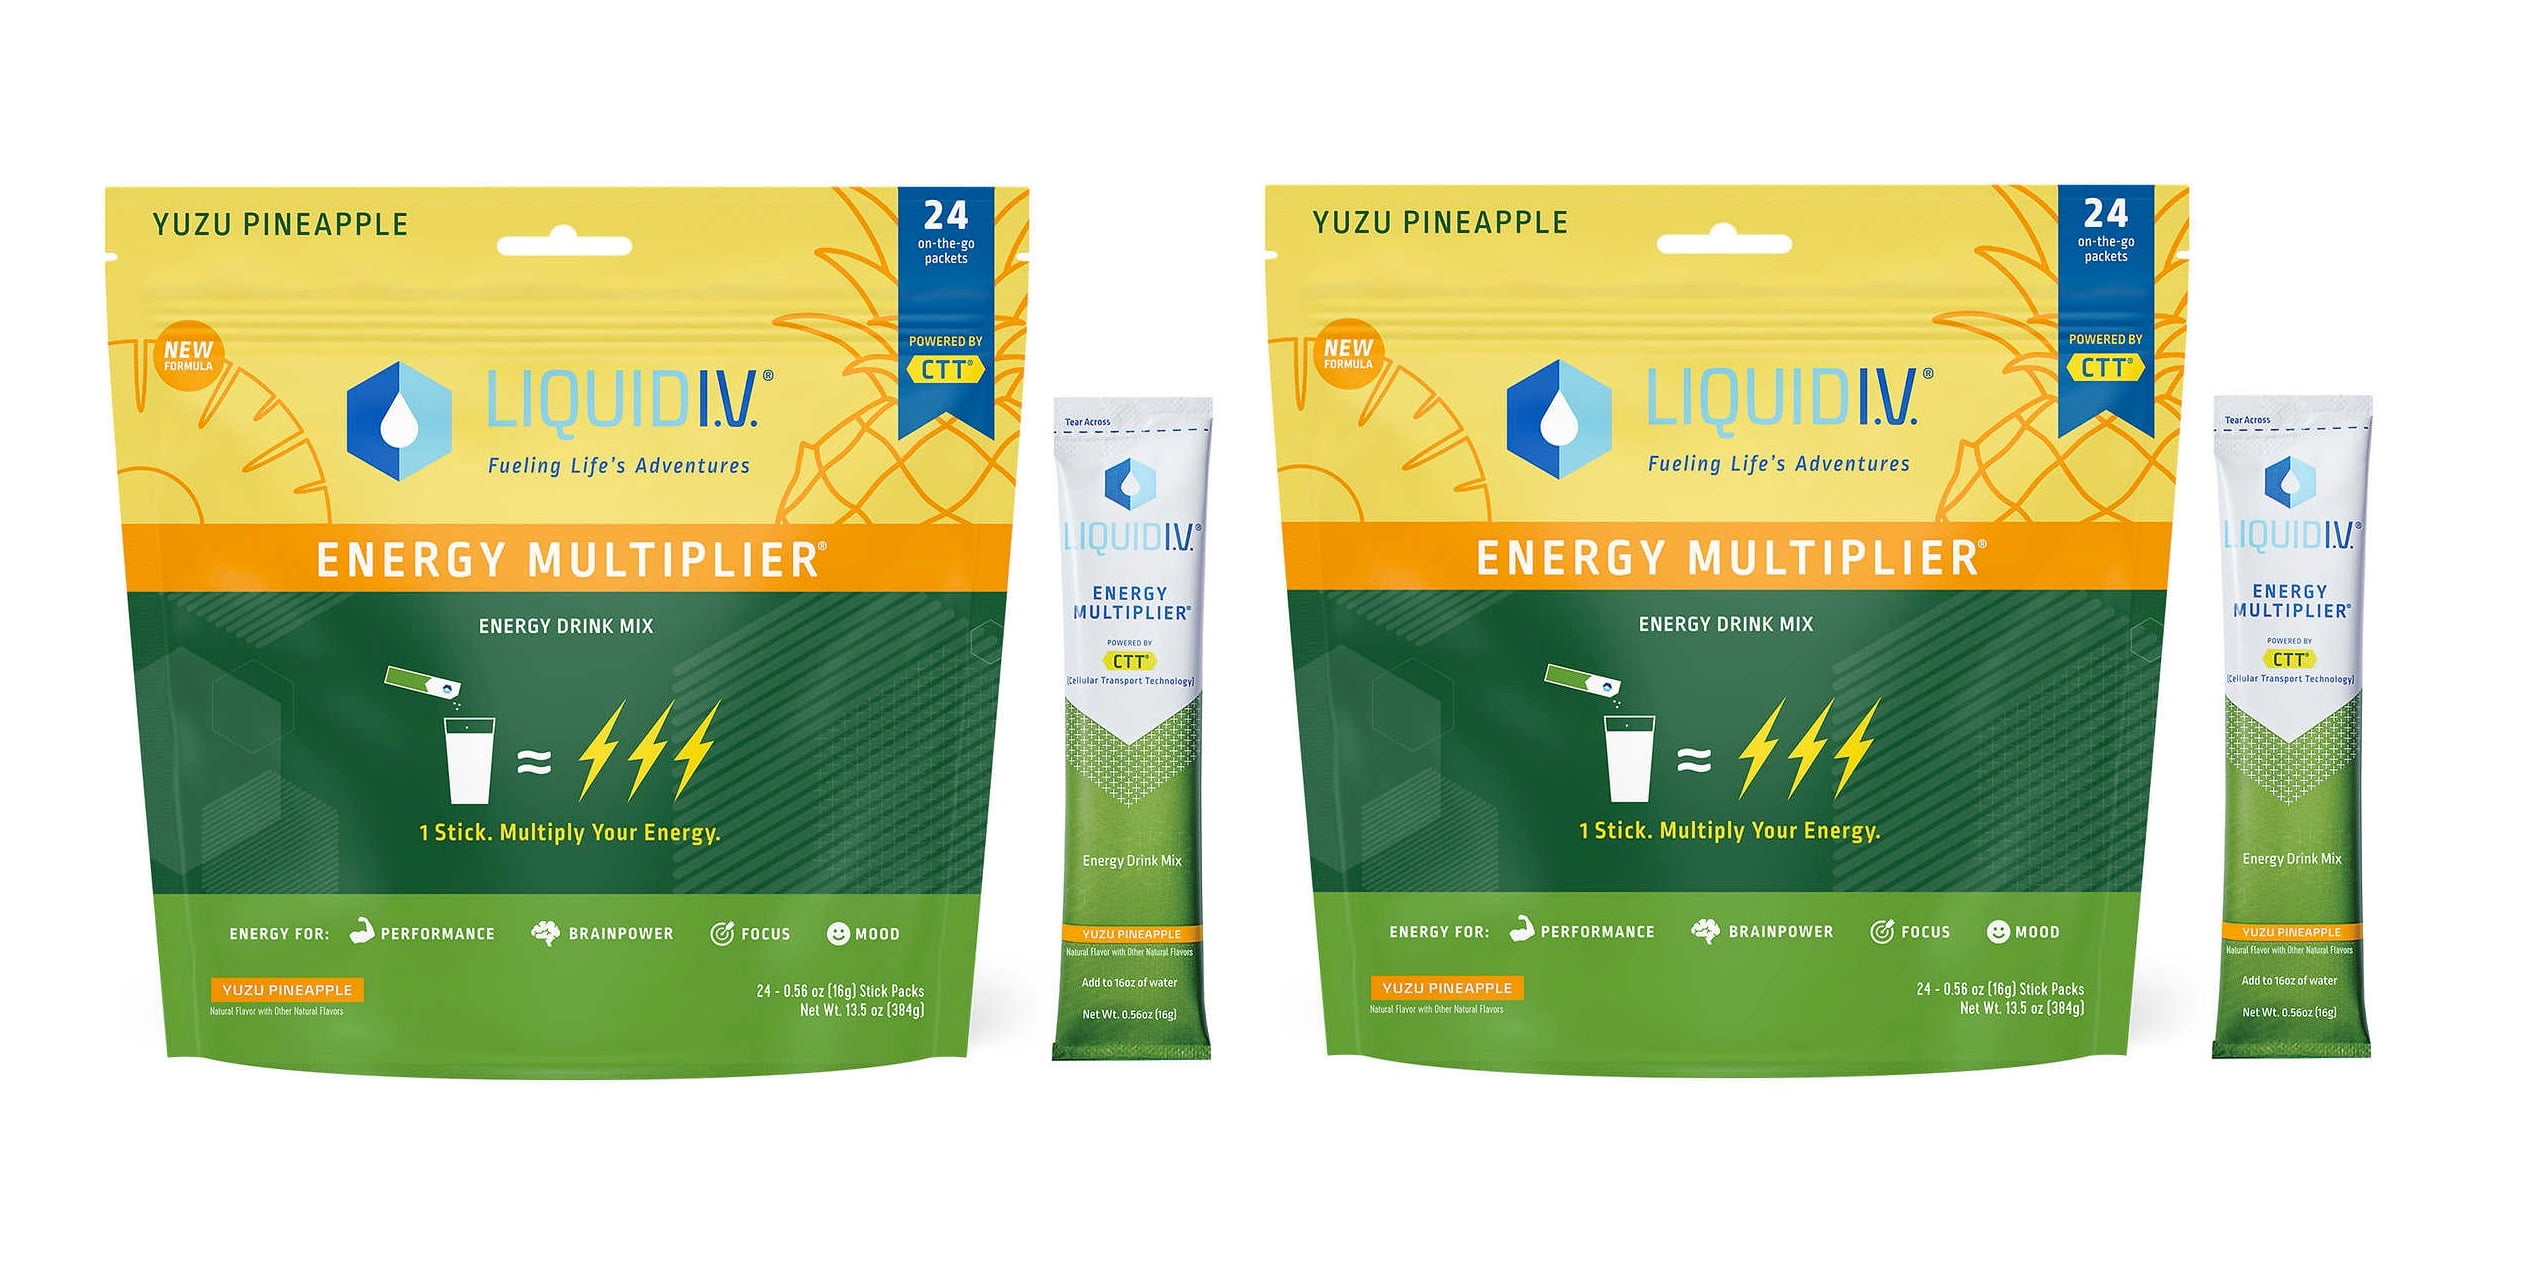 Liquid I.V. Energy Multiplier Yuzu Pineapple, 24 Individual Serving Stick  Packs in Resealable Pouch